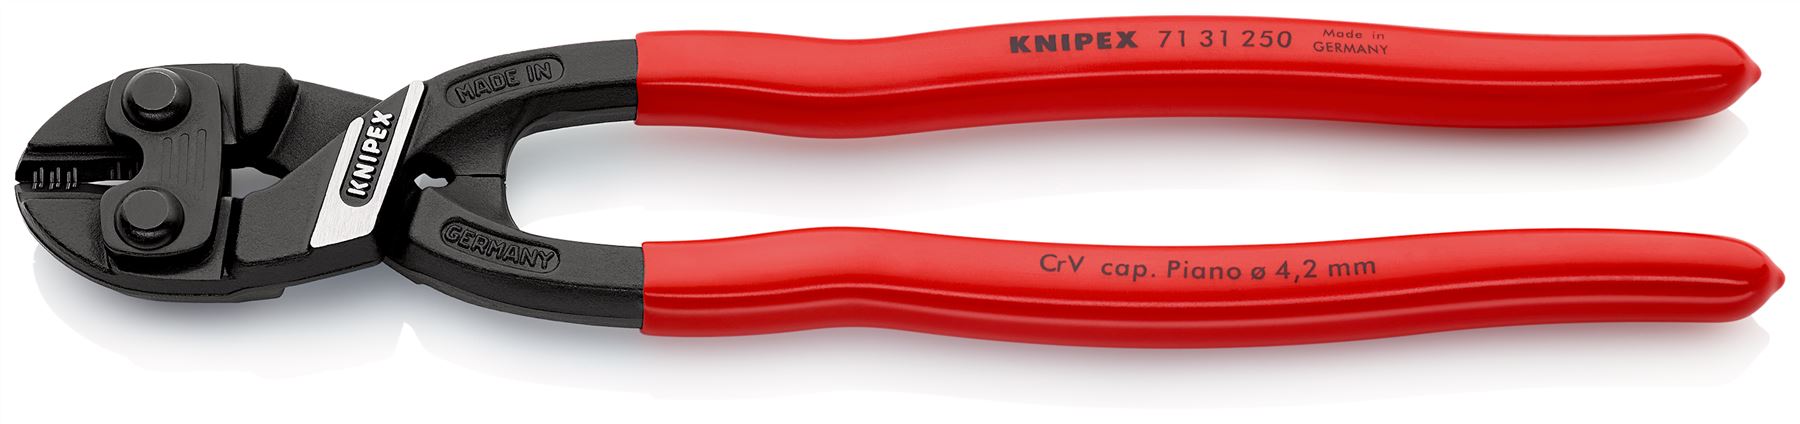 KNIPEX Compact Bolt Cutters CoBolt XL Cutting Pliers 250mm Plastic Coated Handles 71 31 250